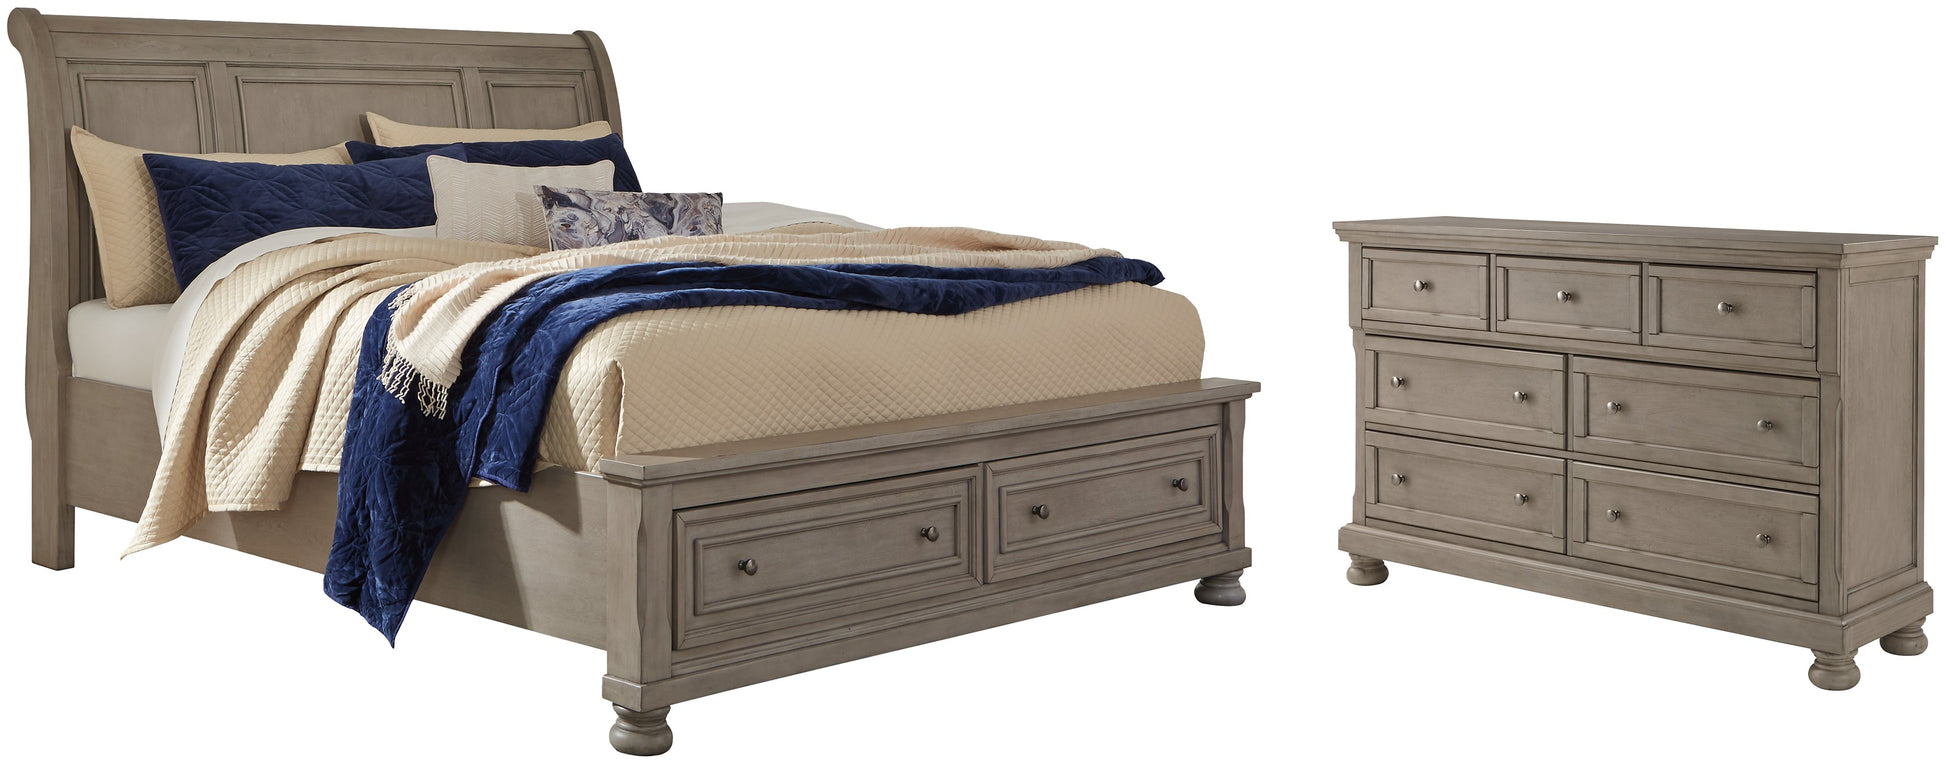 Lettner King Sleigh Bed with 2 Storage Drawers with Dresser at Walker Mattress and Furniture Locations in Cedar Park and Belton TX.